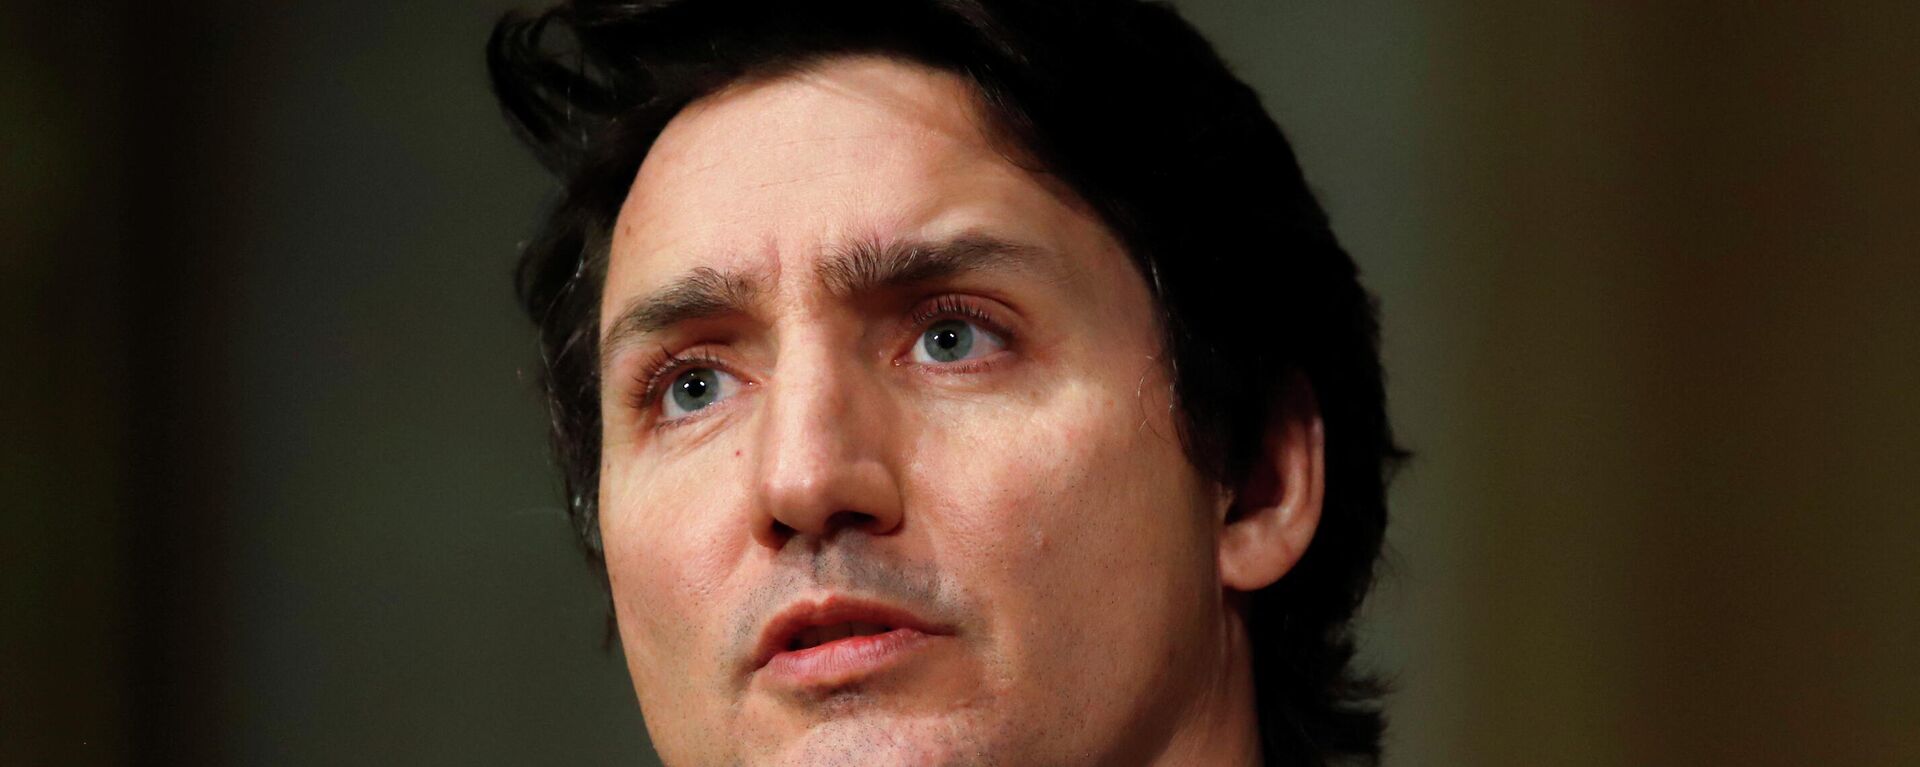 Canada's Prime Minister Justin Trudeau speaks at a news conference about the situation in Ukraine, in Ottawa, Ontario, Canada, February 22, 2022 - Sputnik International, 1920, 01.03.2022